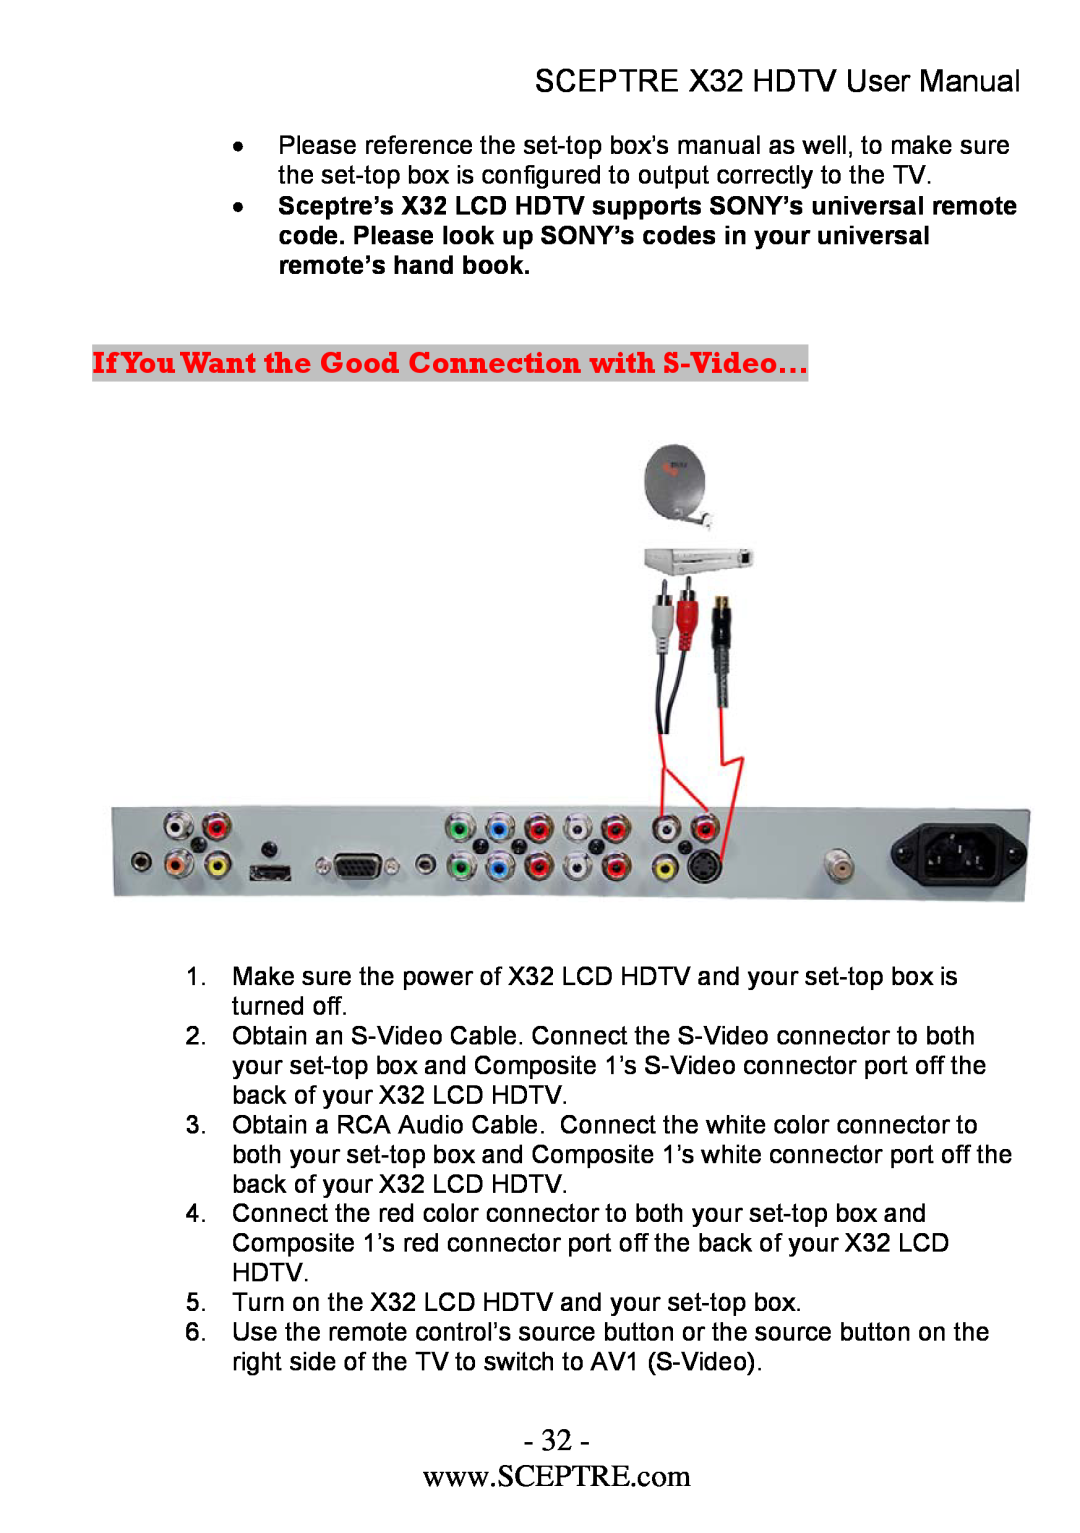 Sceptre Technologies x32 user manual SCEPTRE X32 HDTV User Manual, If You Want the Good Connection with S-Video… 